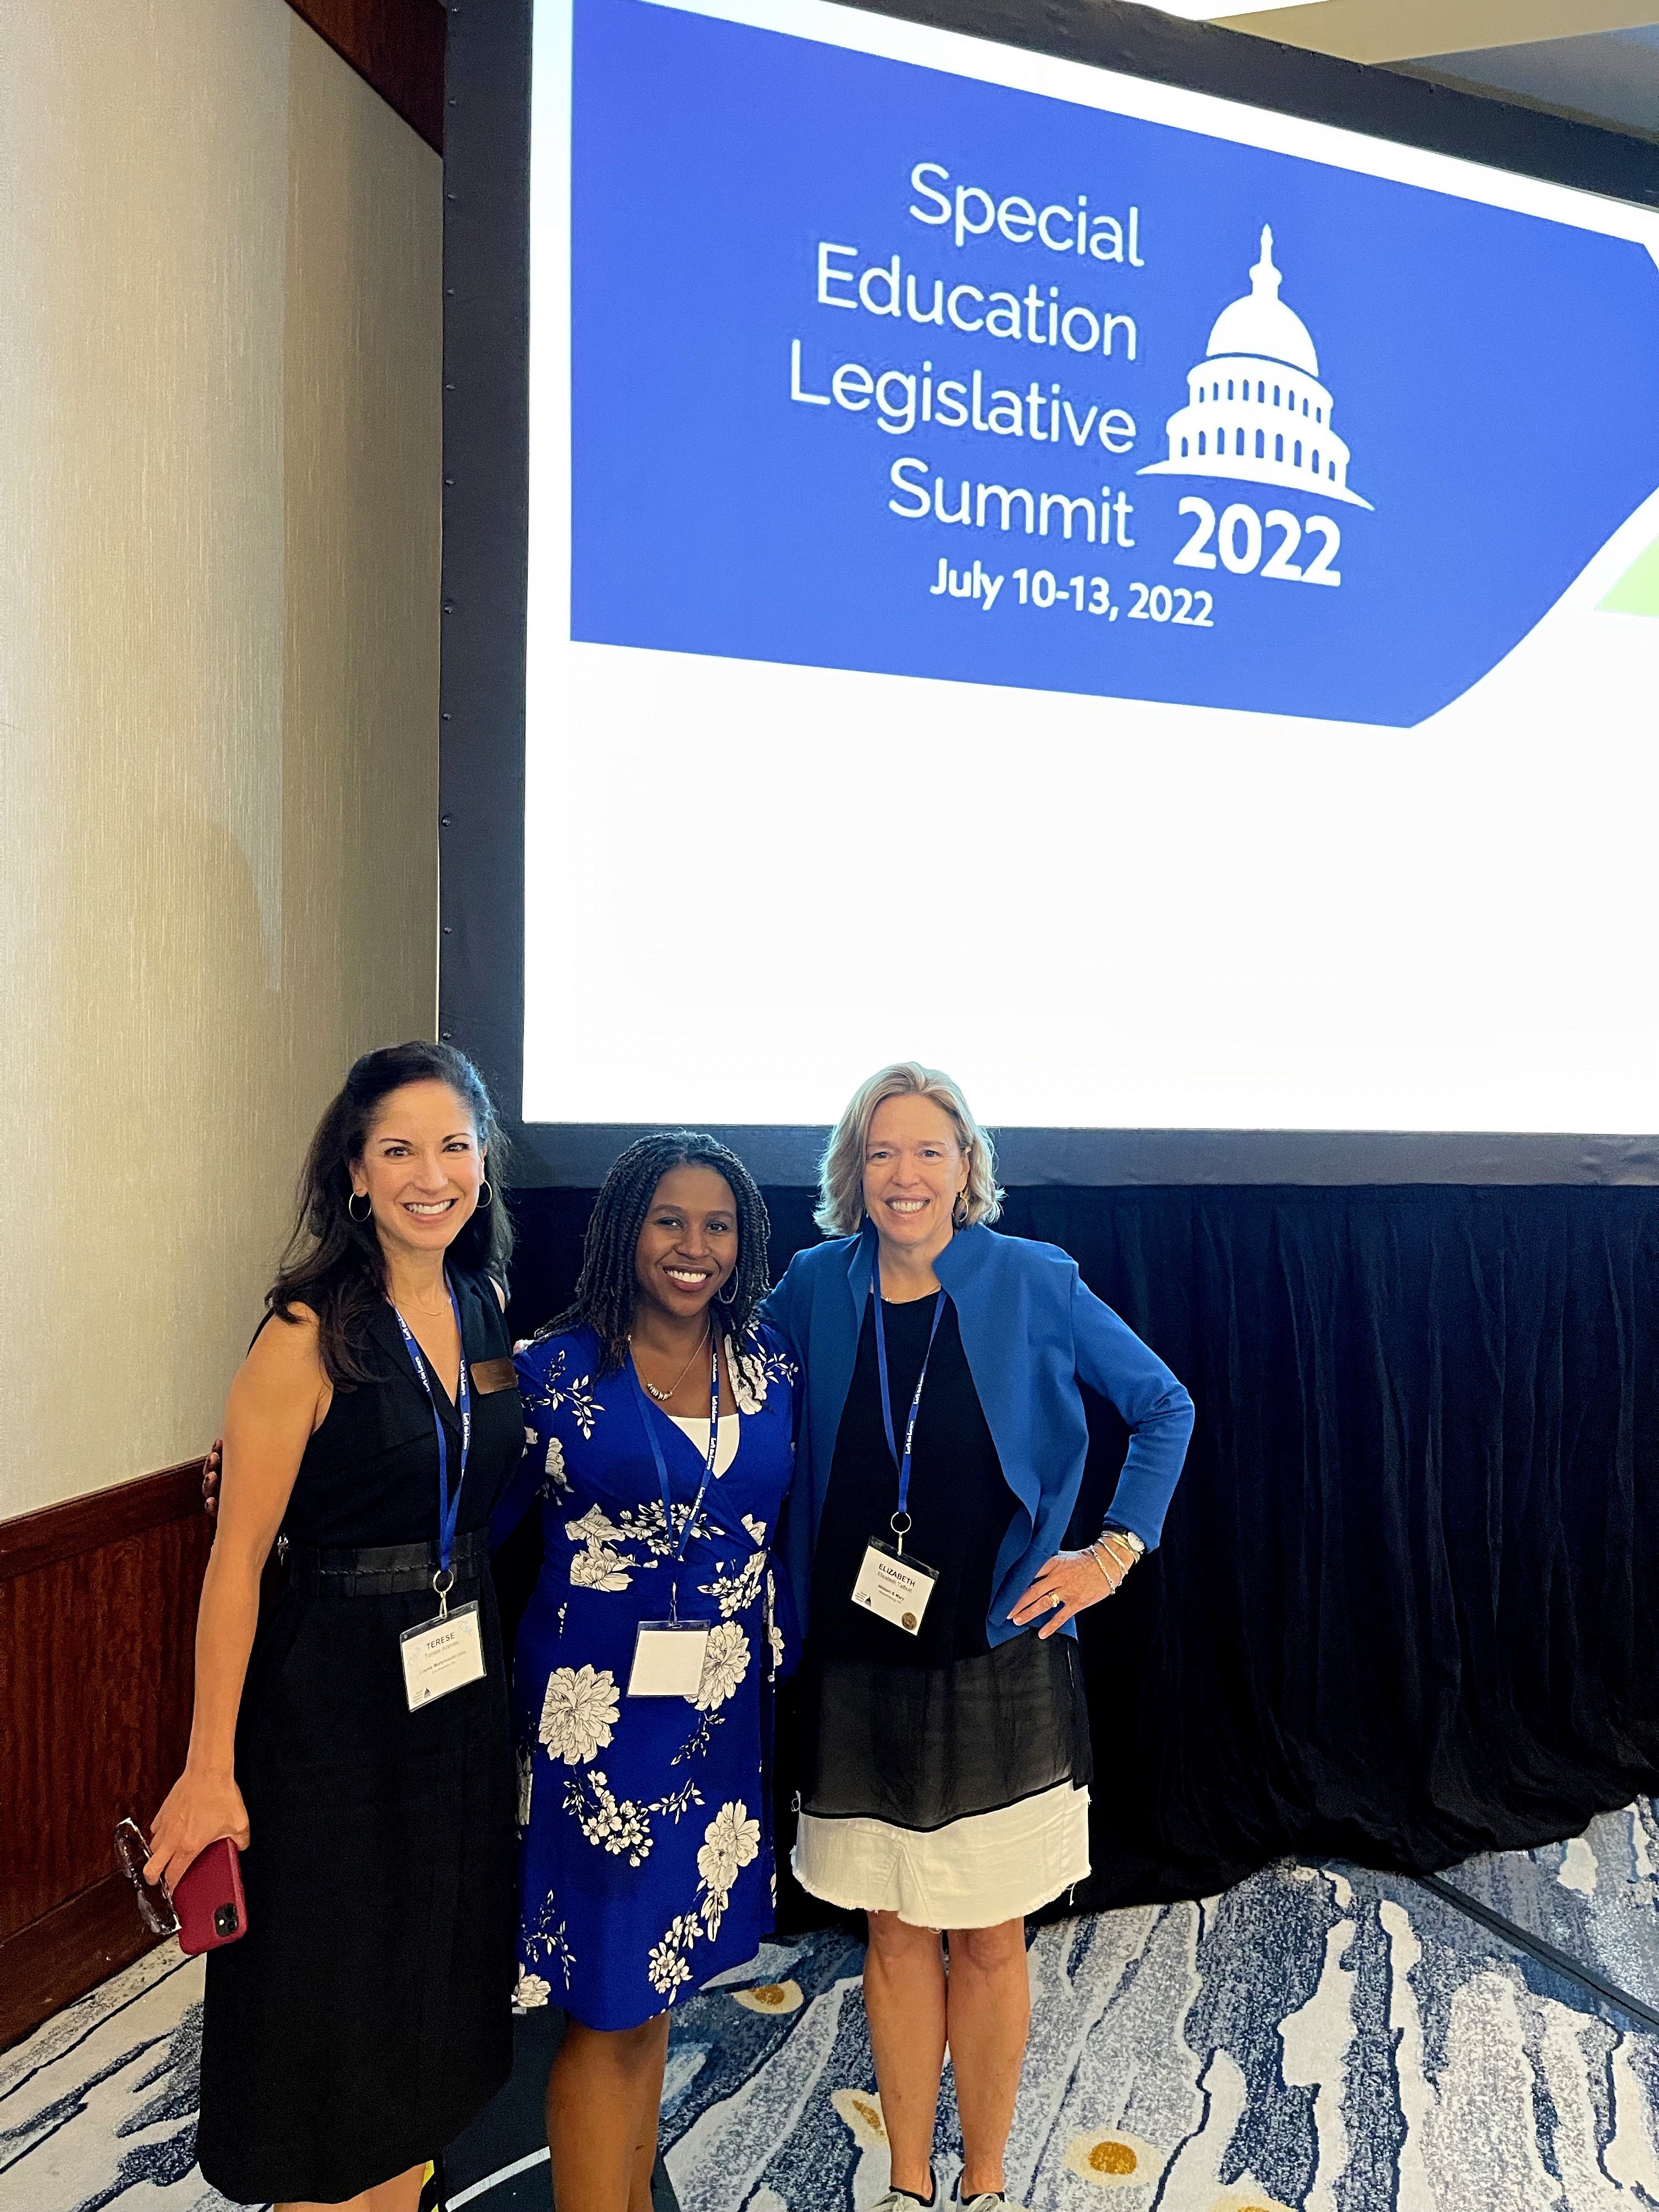 Virginia State Team including Terese Aceves (member of CEC) on the left, Celeste Malone (President of the National Association of School Psychologists)  in the middle, and Professor Elizabeth Talbot on the right